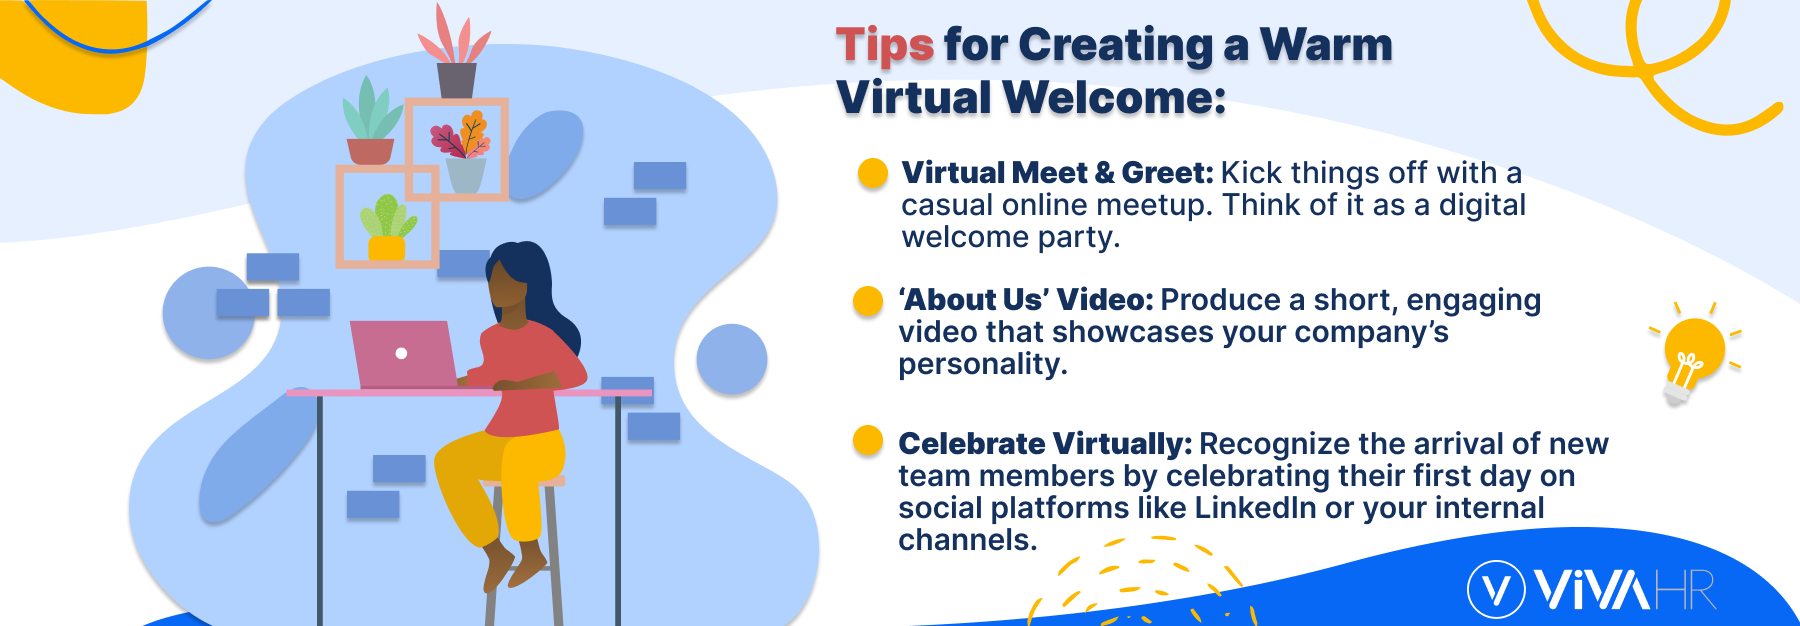 Virtual Onboarding Tips For Welcoming Remote Employees